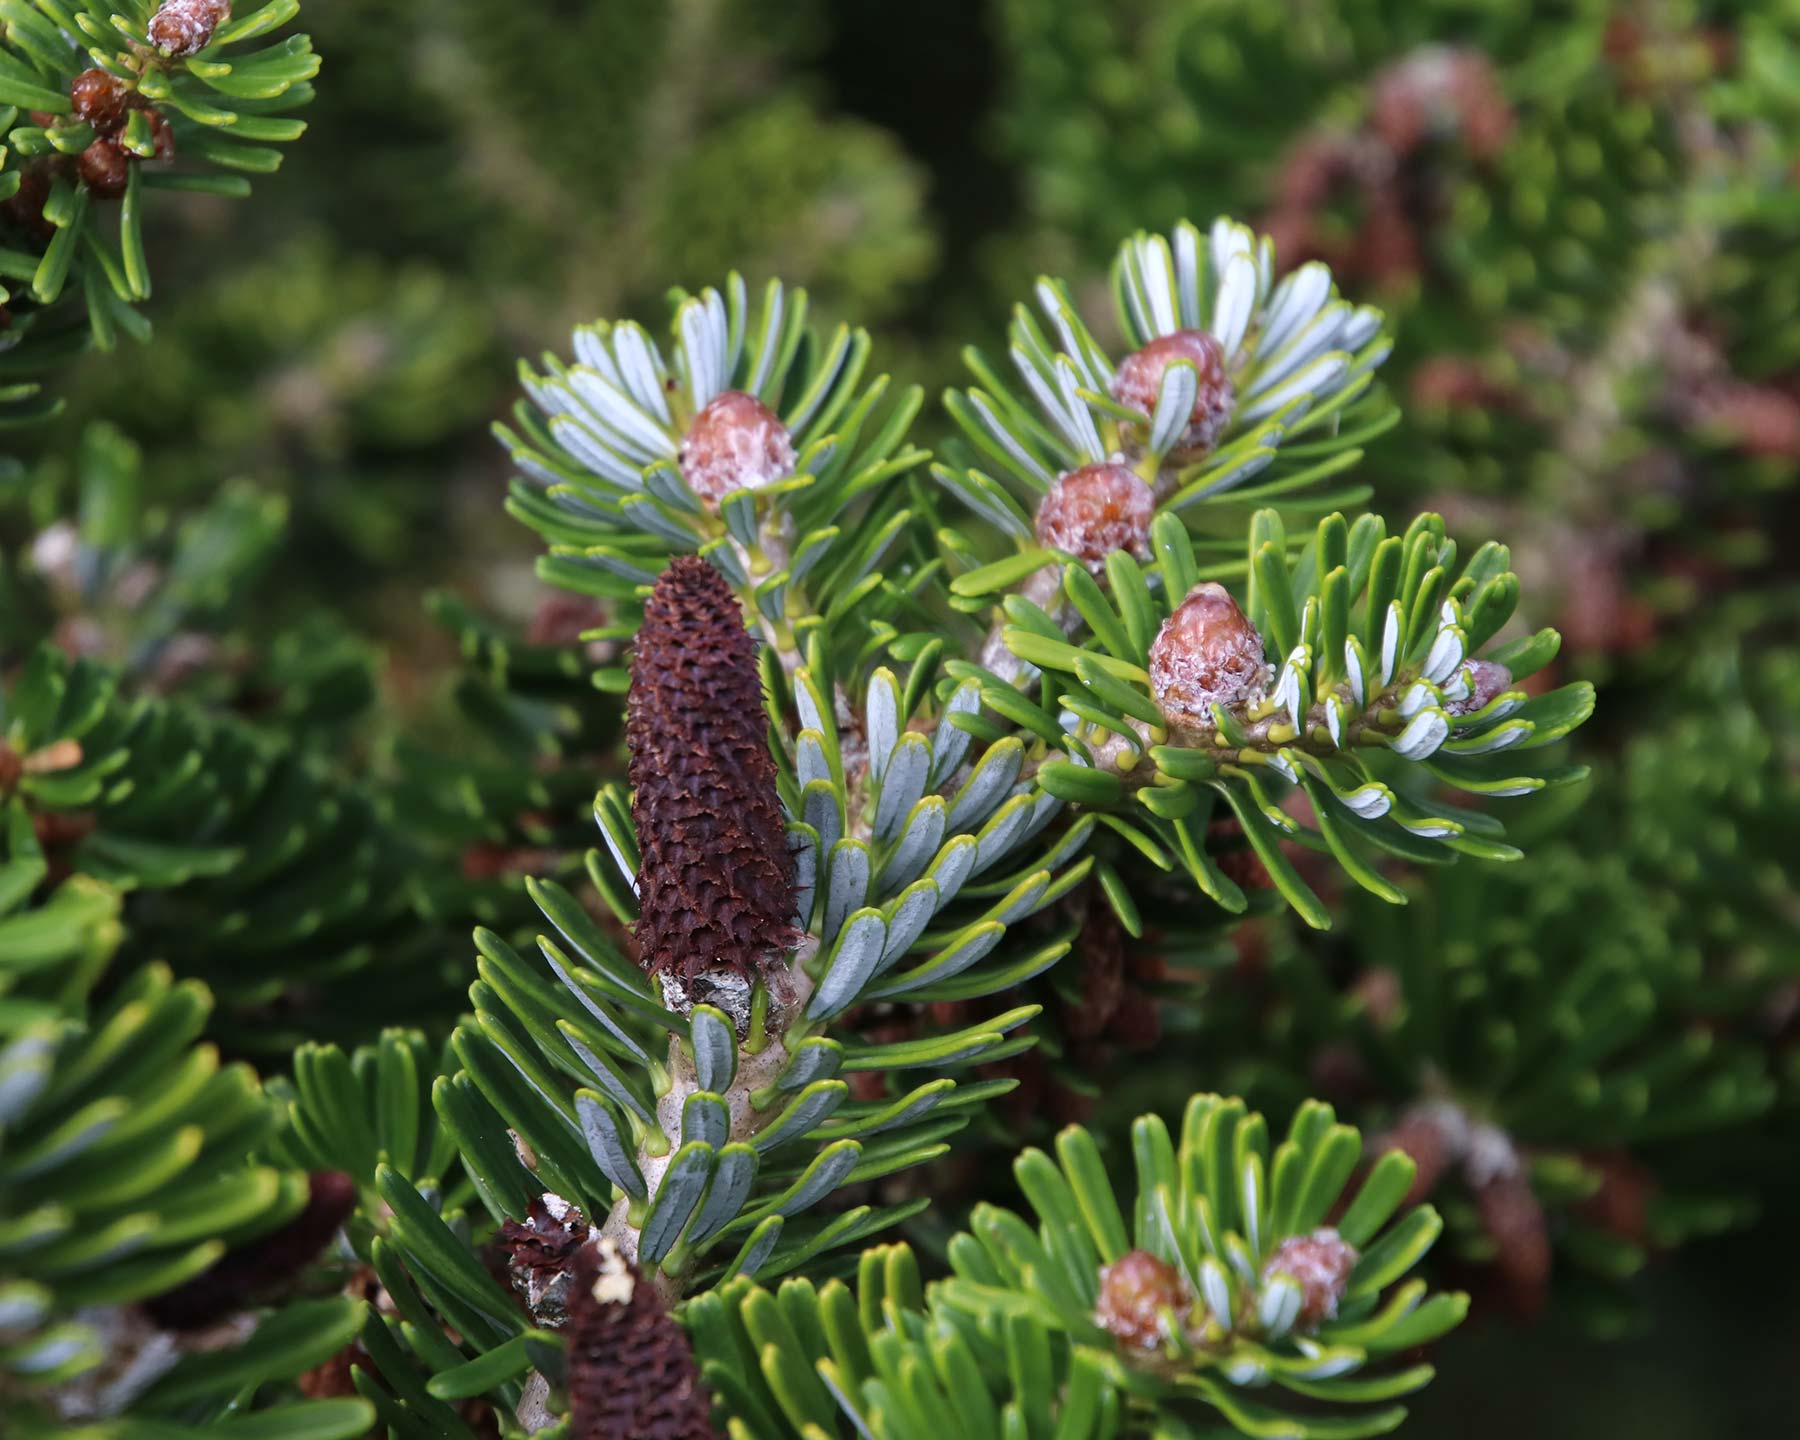 Abies koreana - old cones and new growth